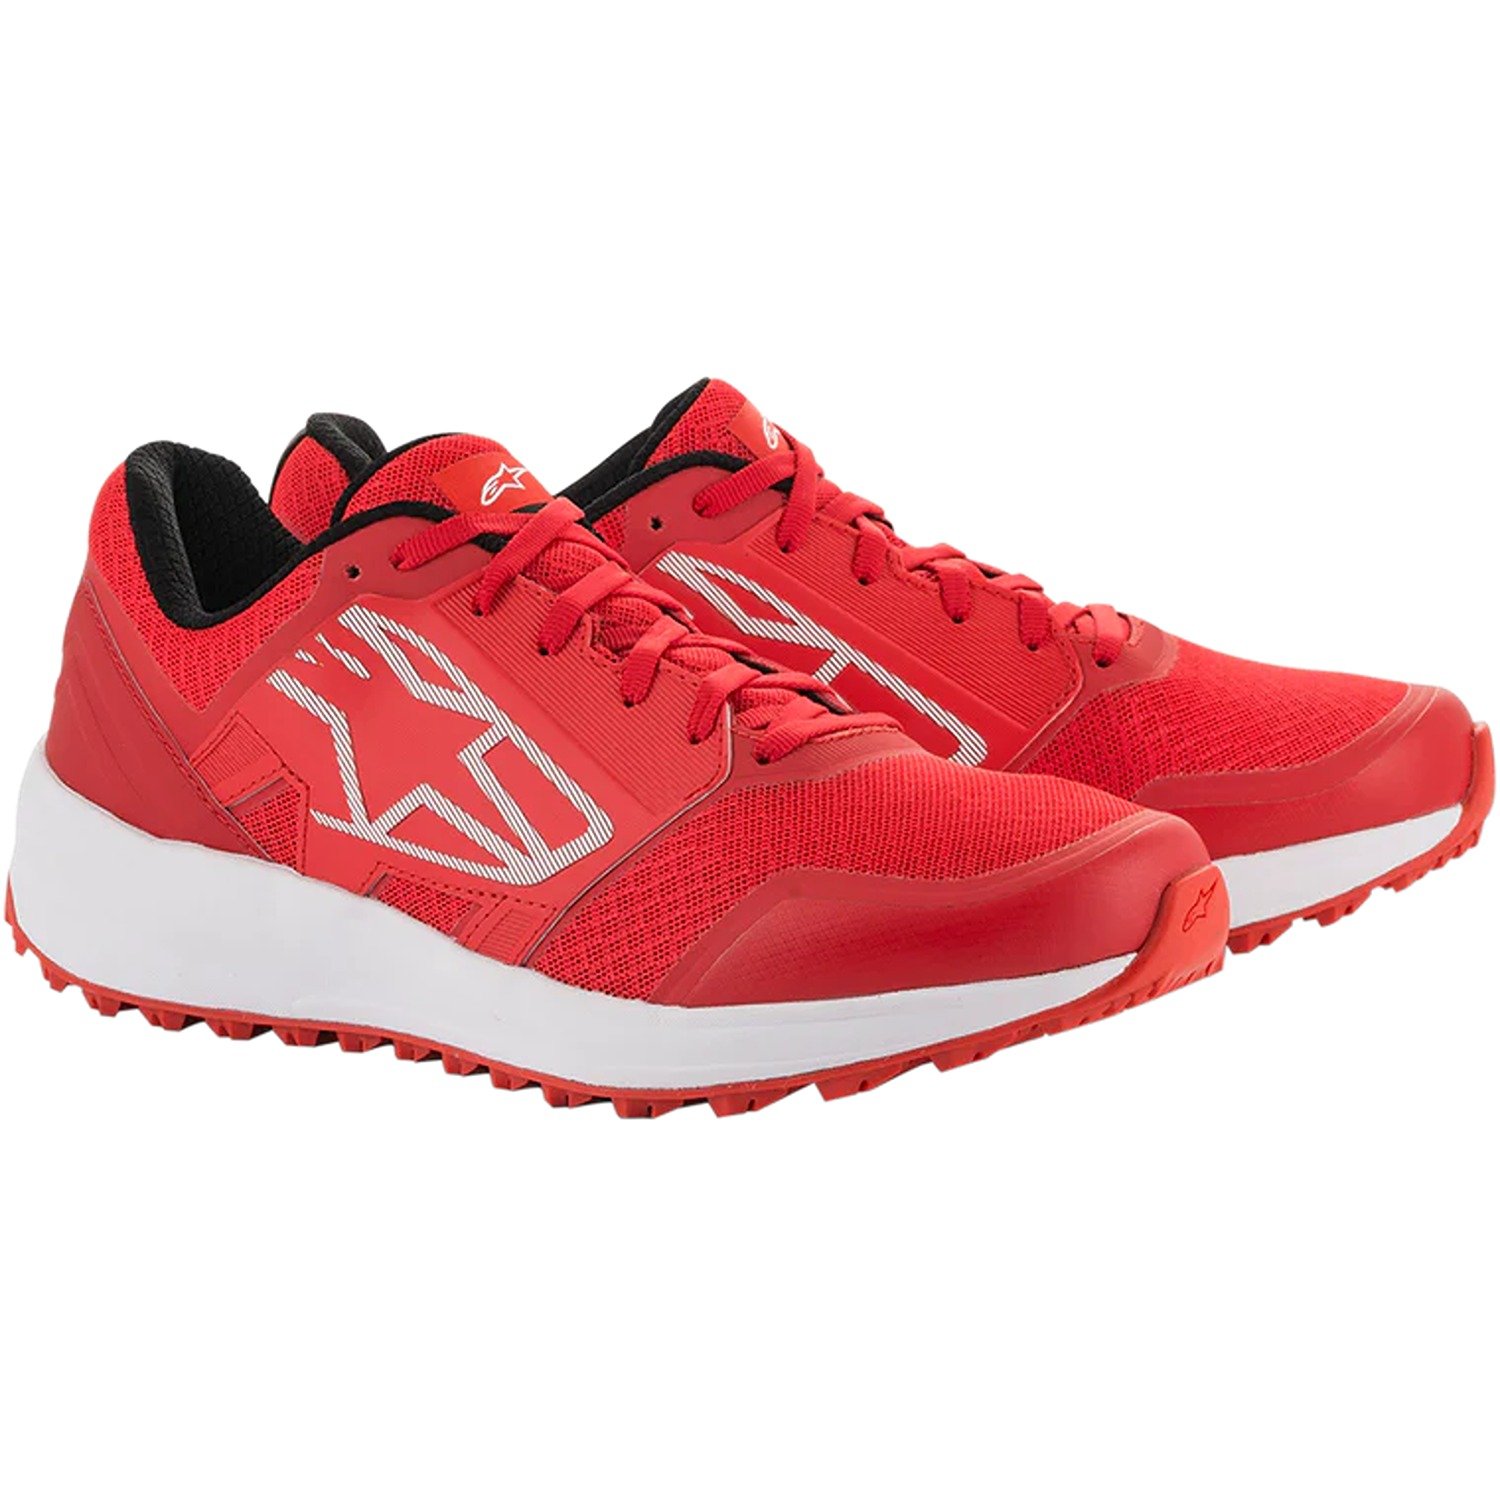 Image of Alpinestars Meta Trail Shoes Red White Taille US 105